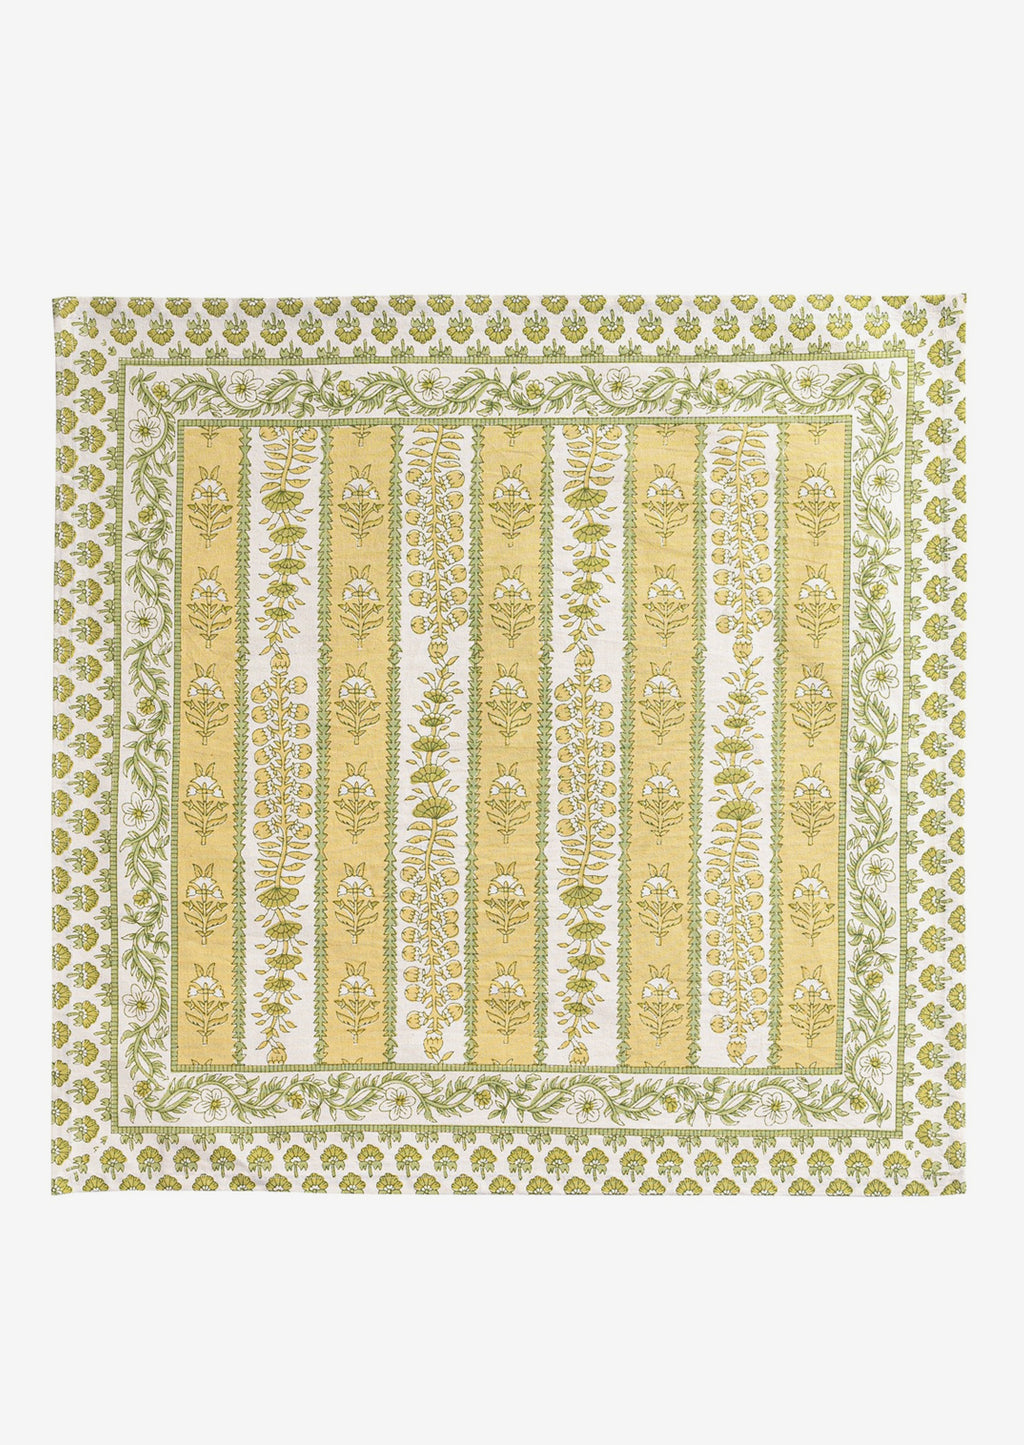 2: A set of green and yellow floral print napkins.